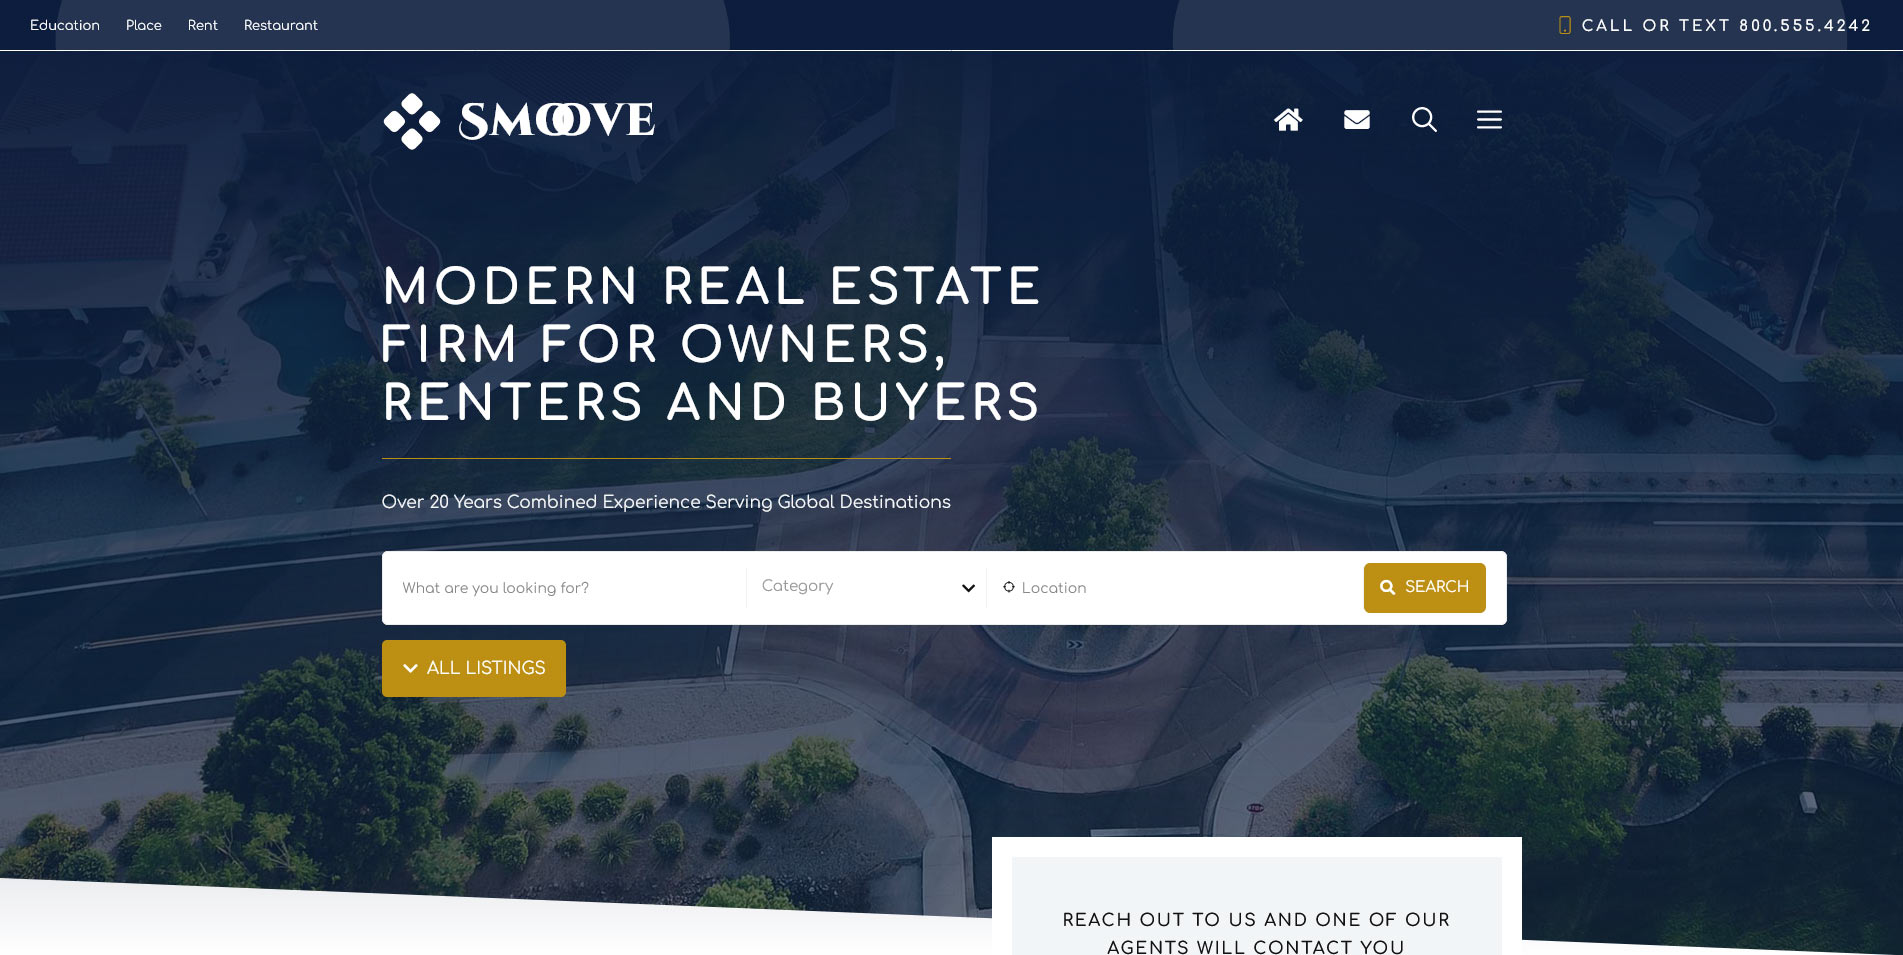 A great website design for a real estate company.